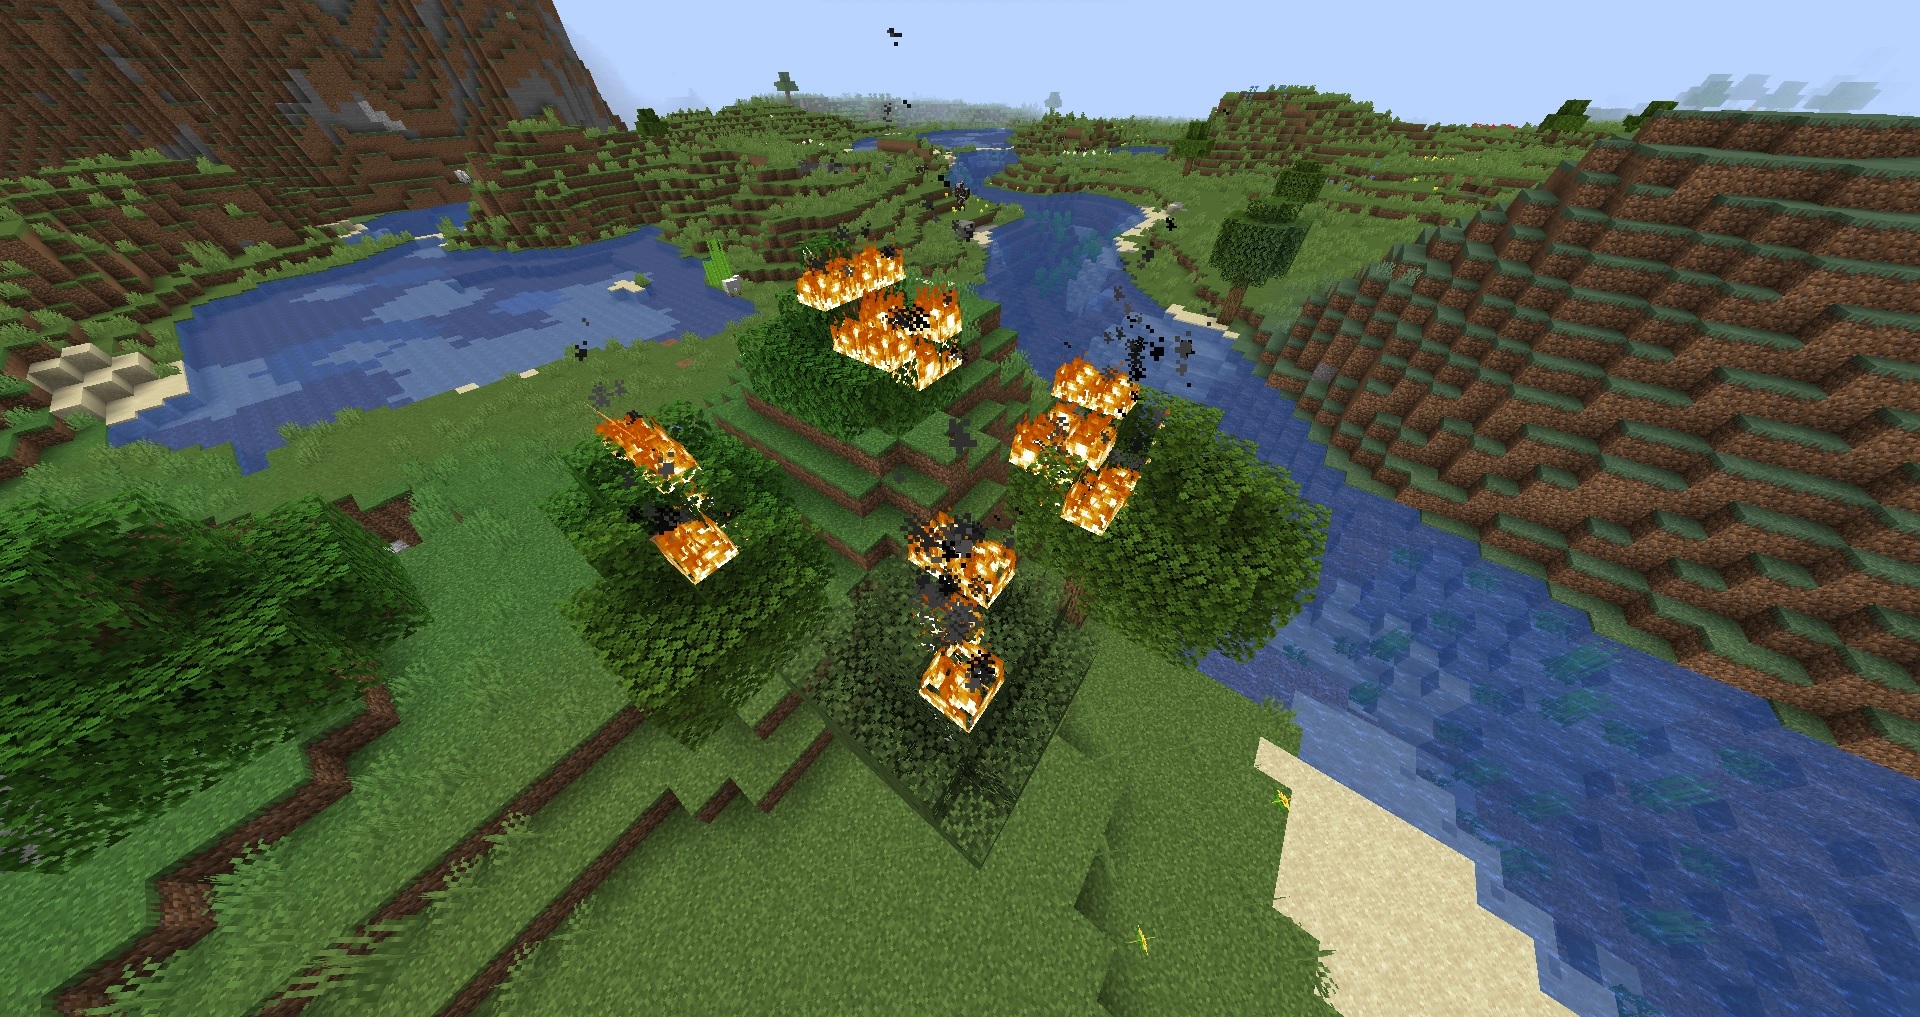 Screenshot of fire in Minecraft. A heavily stylized, pixelated block rendering of an outdoors environment with a river and several hills and cliffs. A cluster of trees in the center of the view is caught on fire.